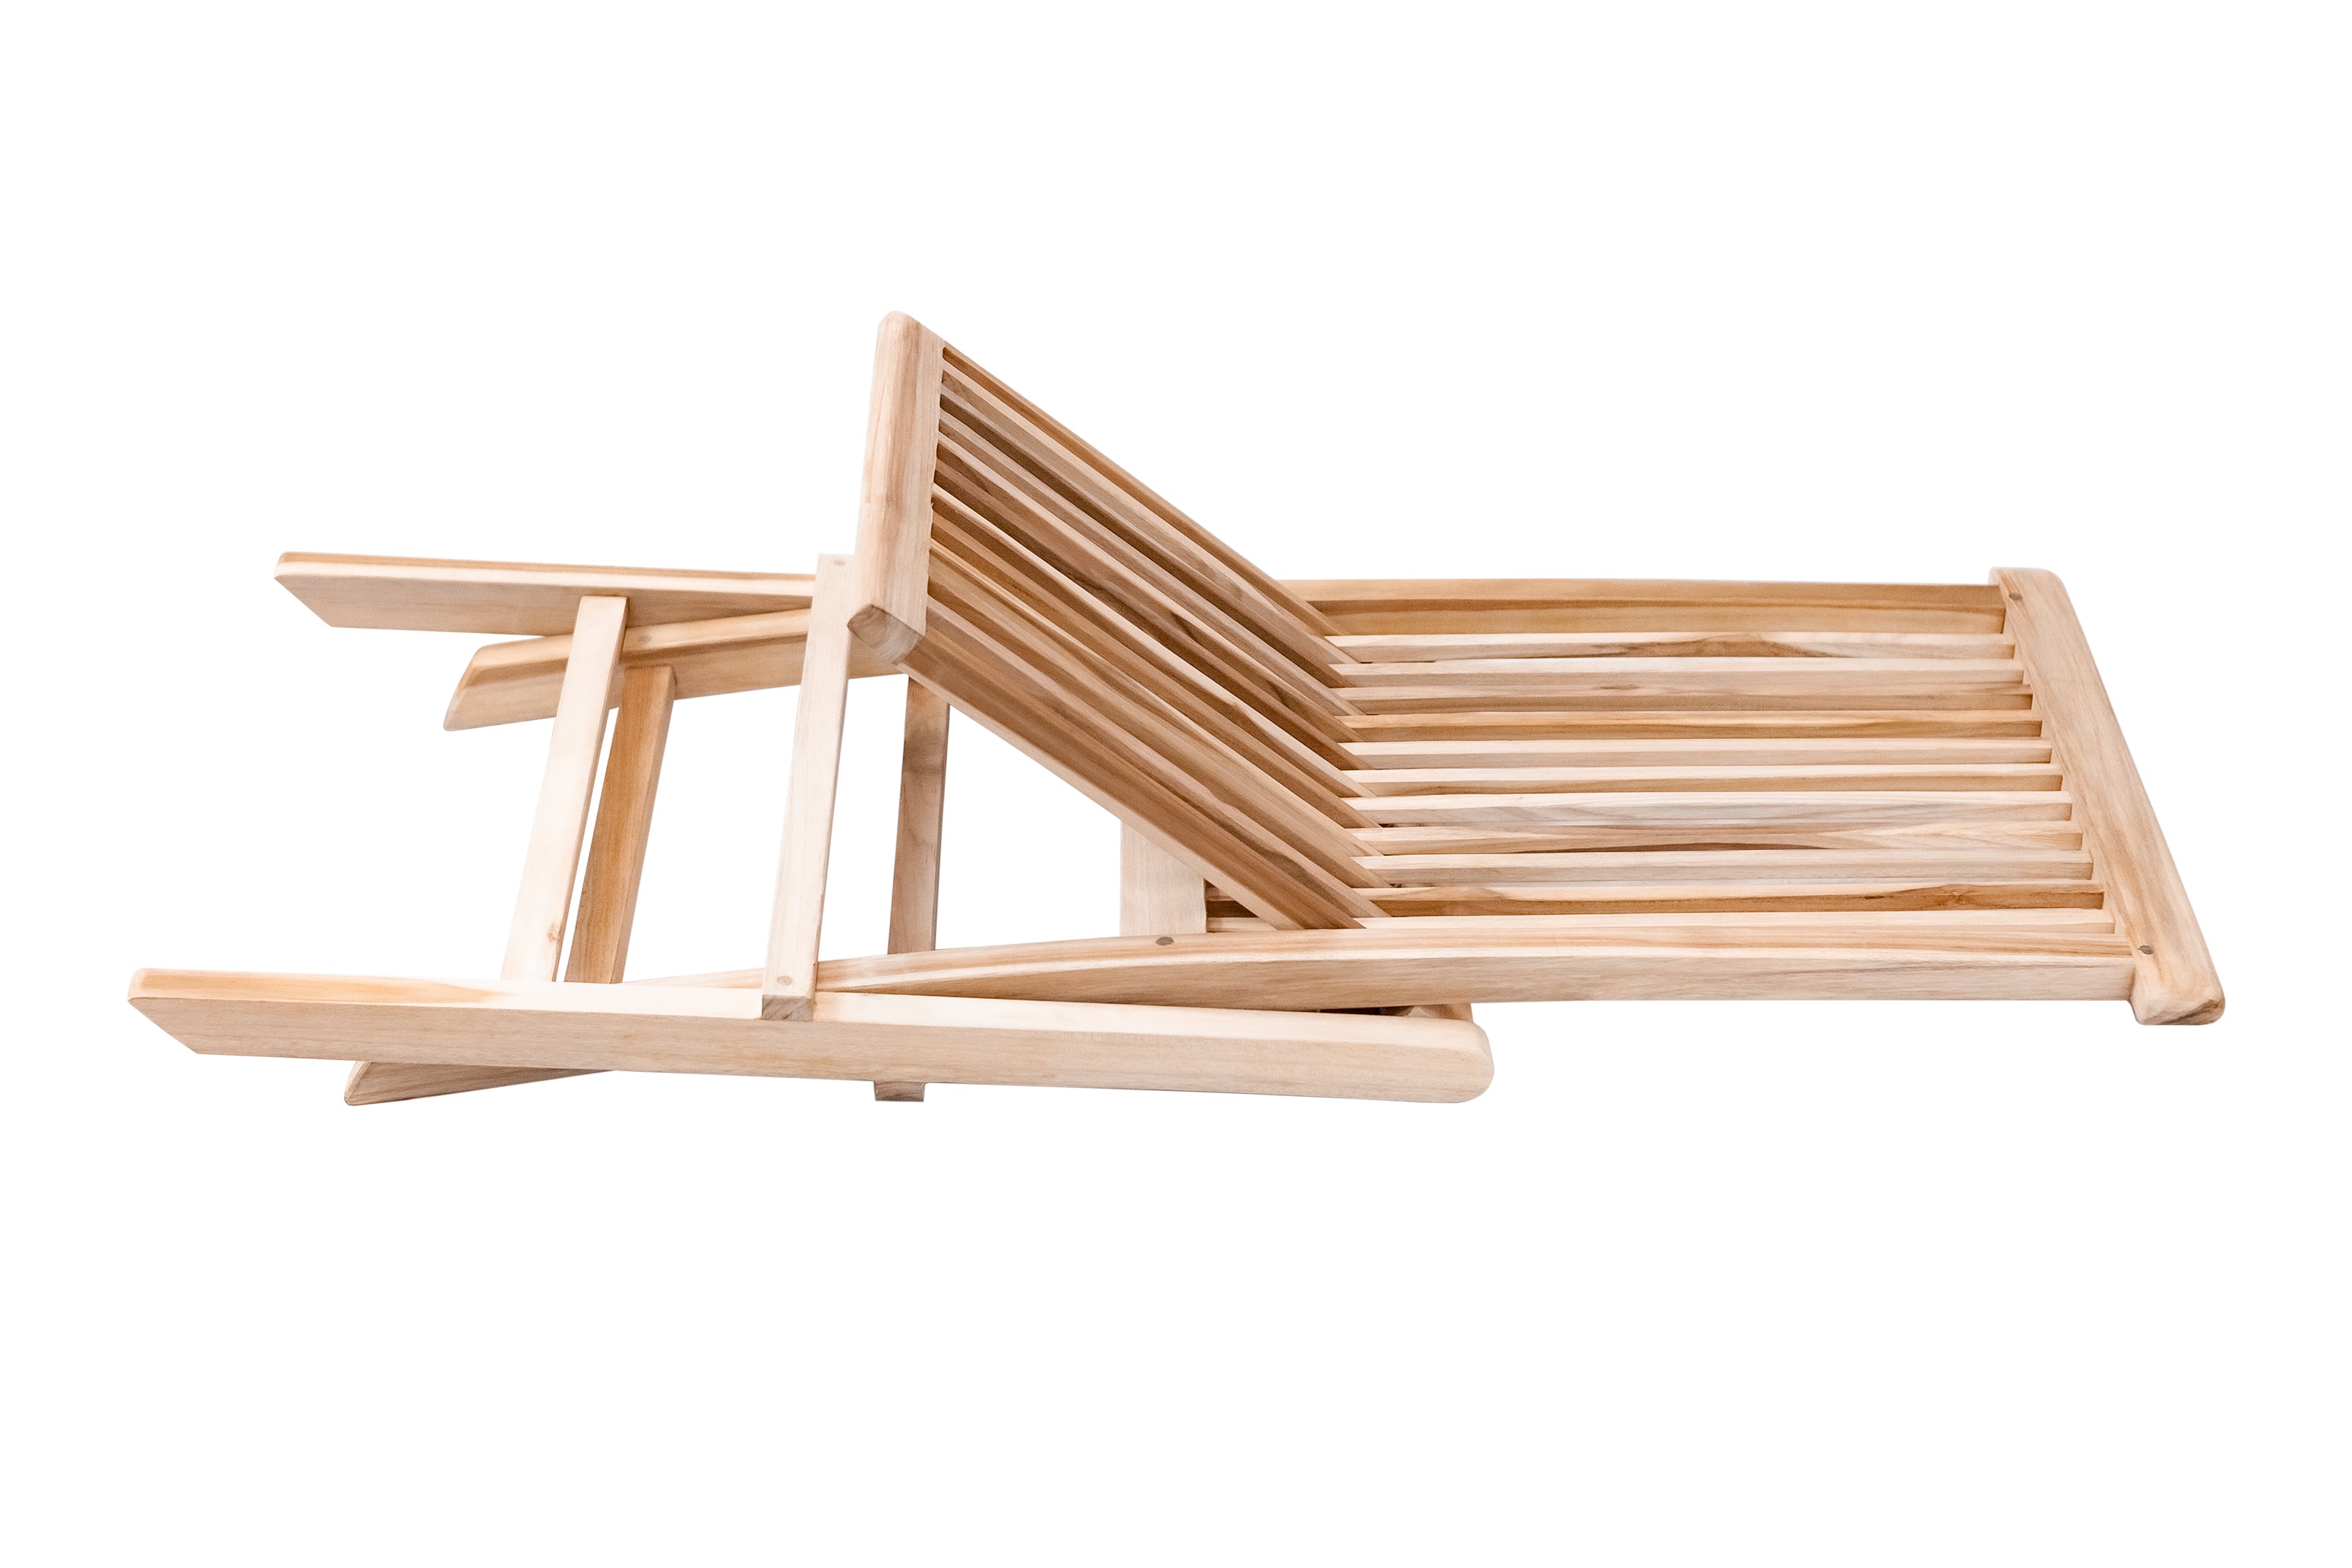 Naples Natural Folding Chair